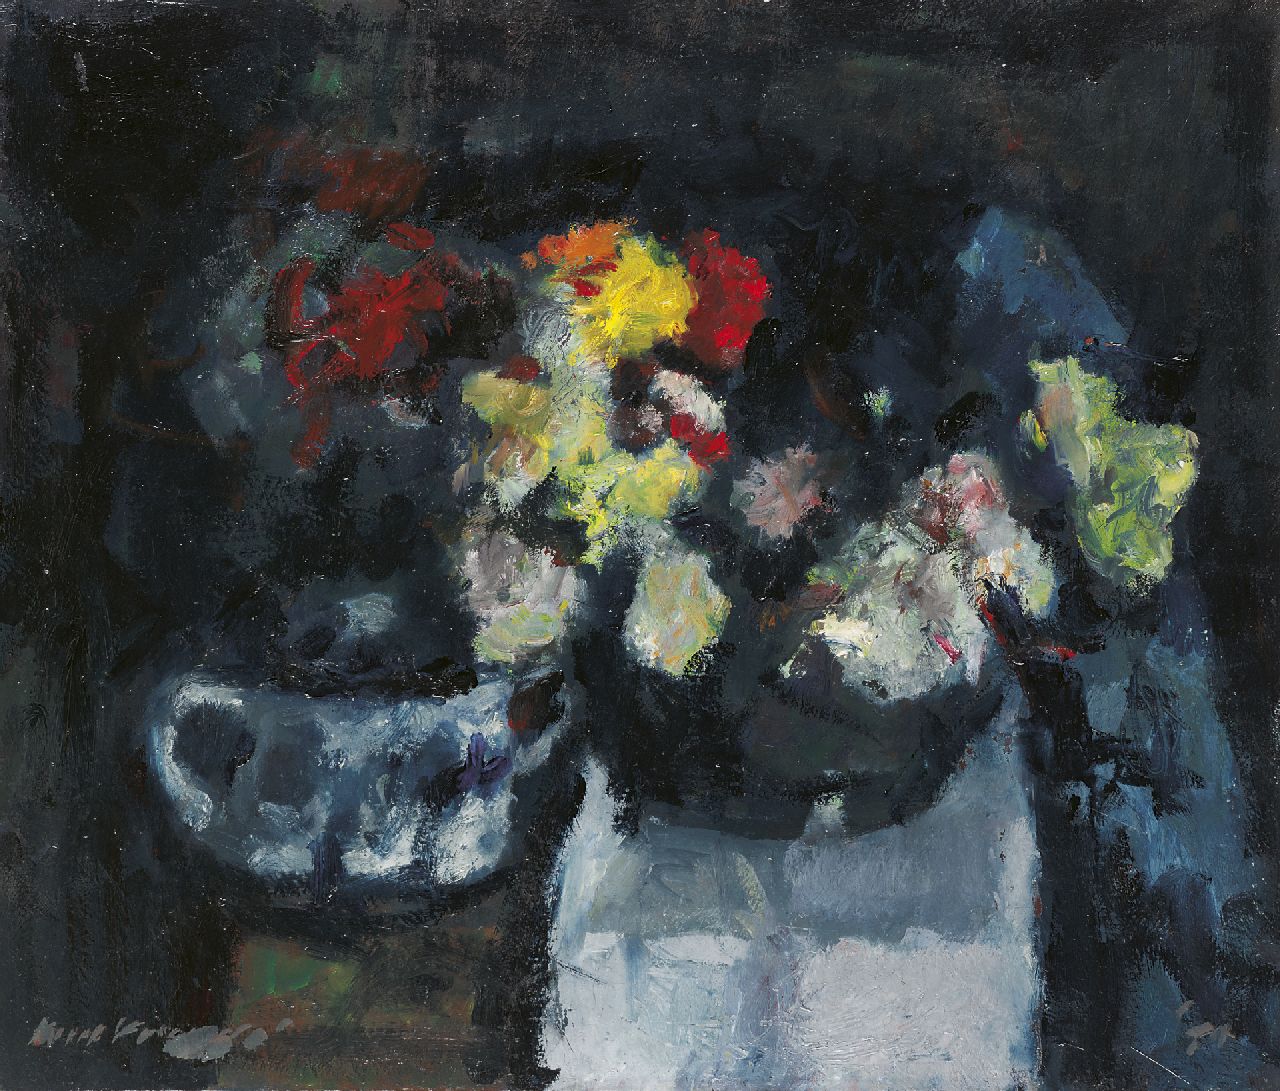 Verwey K.  | Kees Verwey | Paintings offered for sale | Sillife with flowers, oil on canvas 60.2 x 70.5 cm, signed l.l